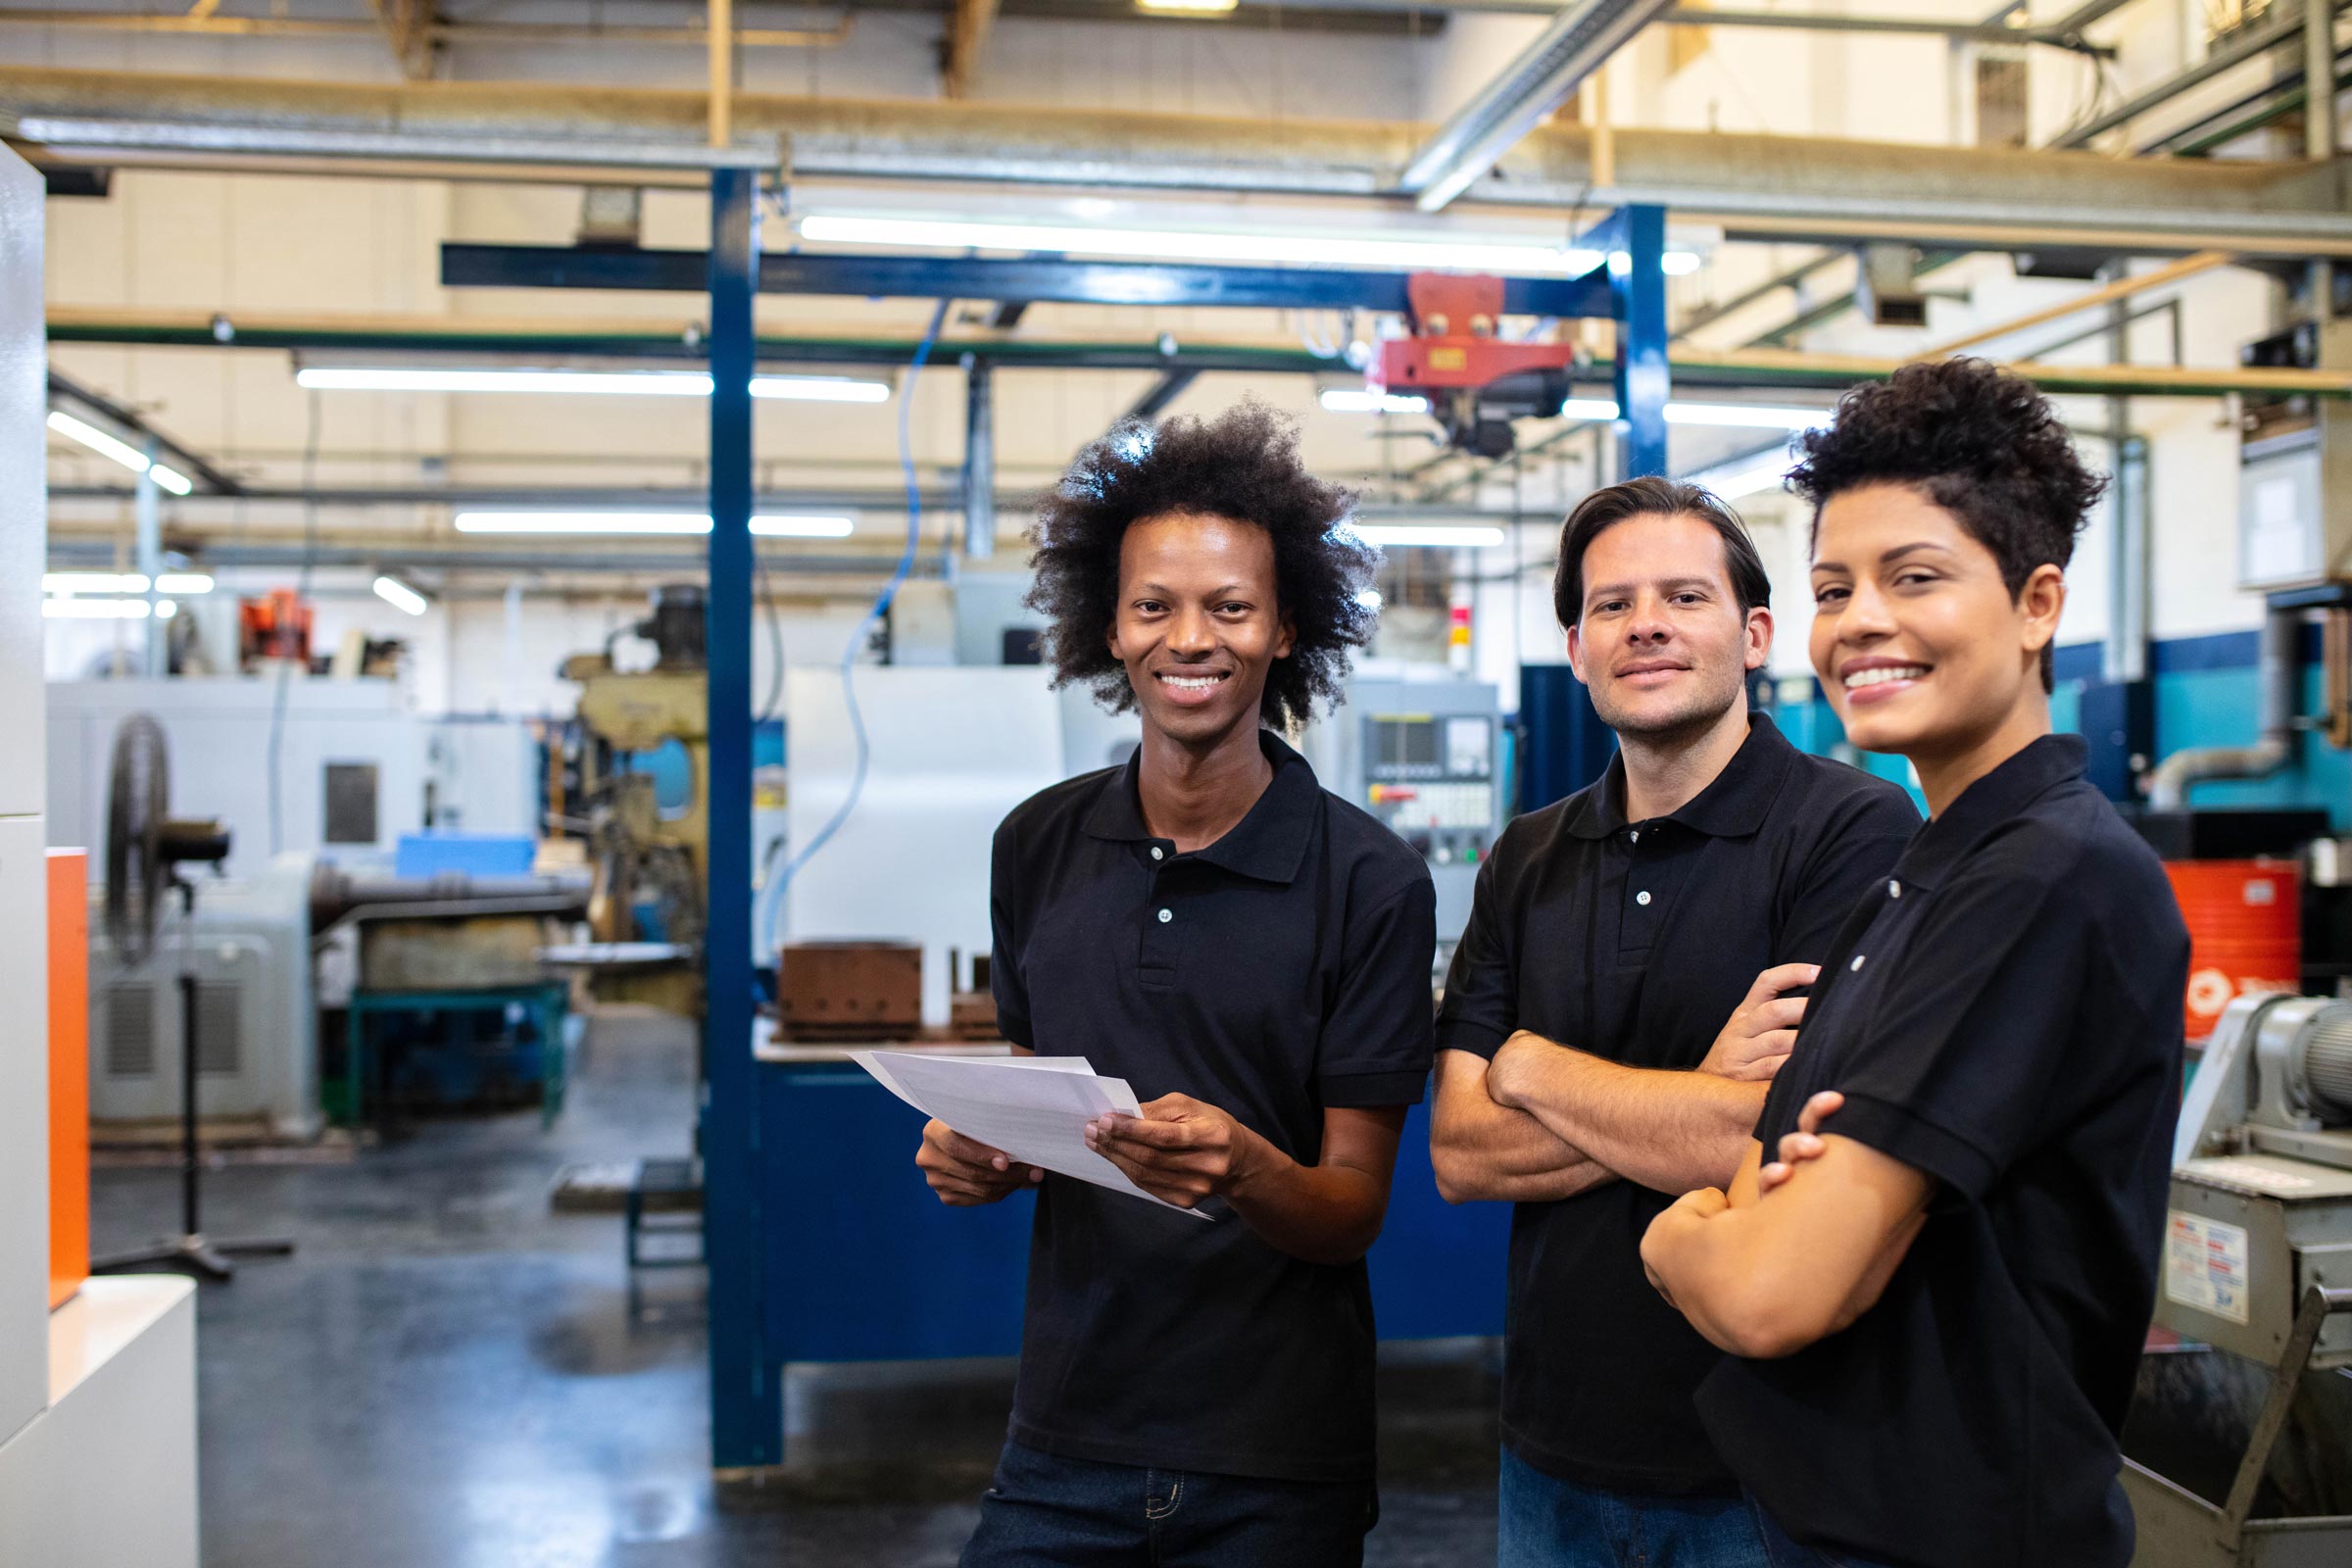 A diverse group of 3 workers in polo shirts in a factory setting